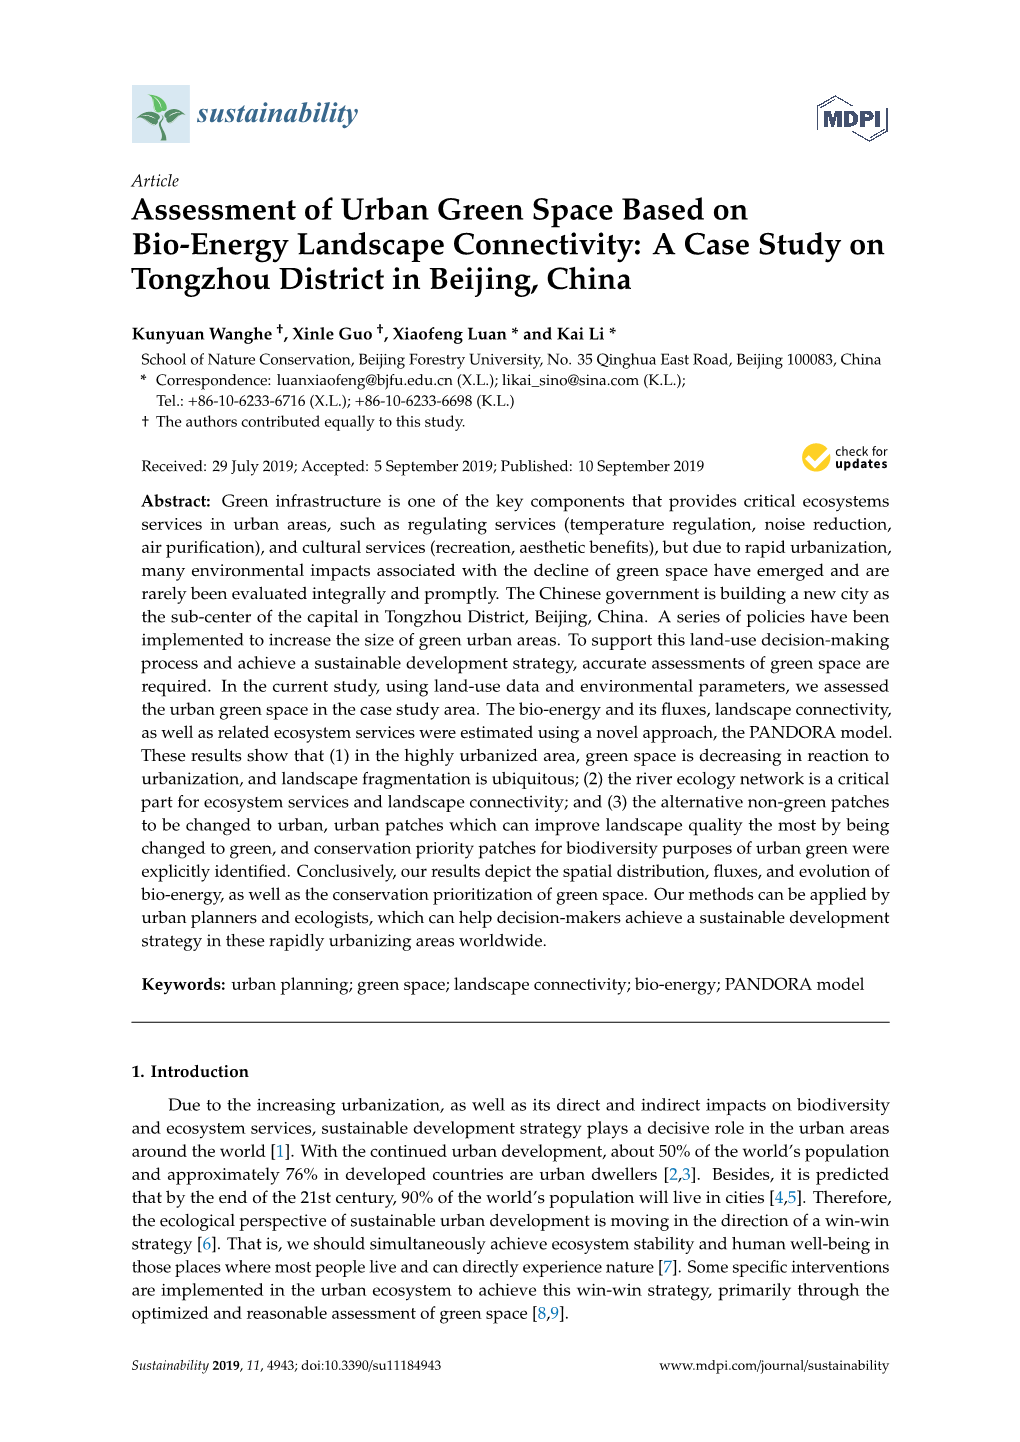 Assessment of Urban Green Space Based on Bio-Energy Landscape Connectivity: a Case Study on Tongzhou District in Beijing, China